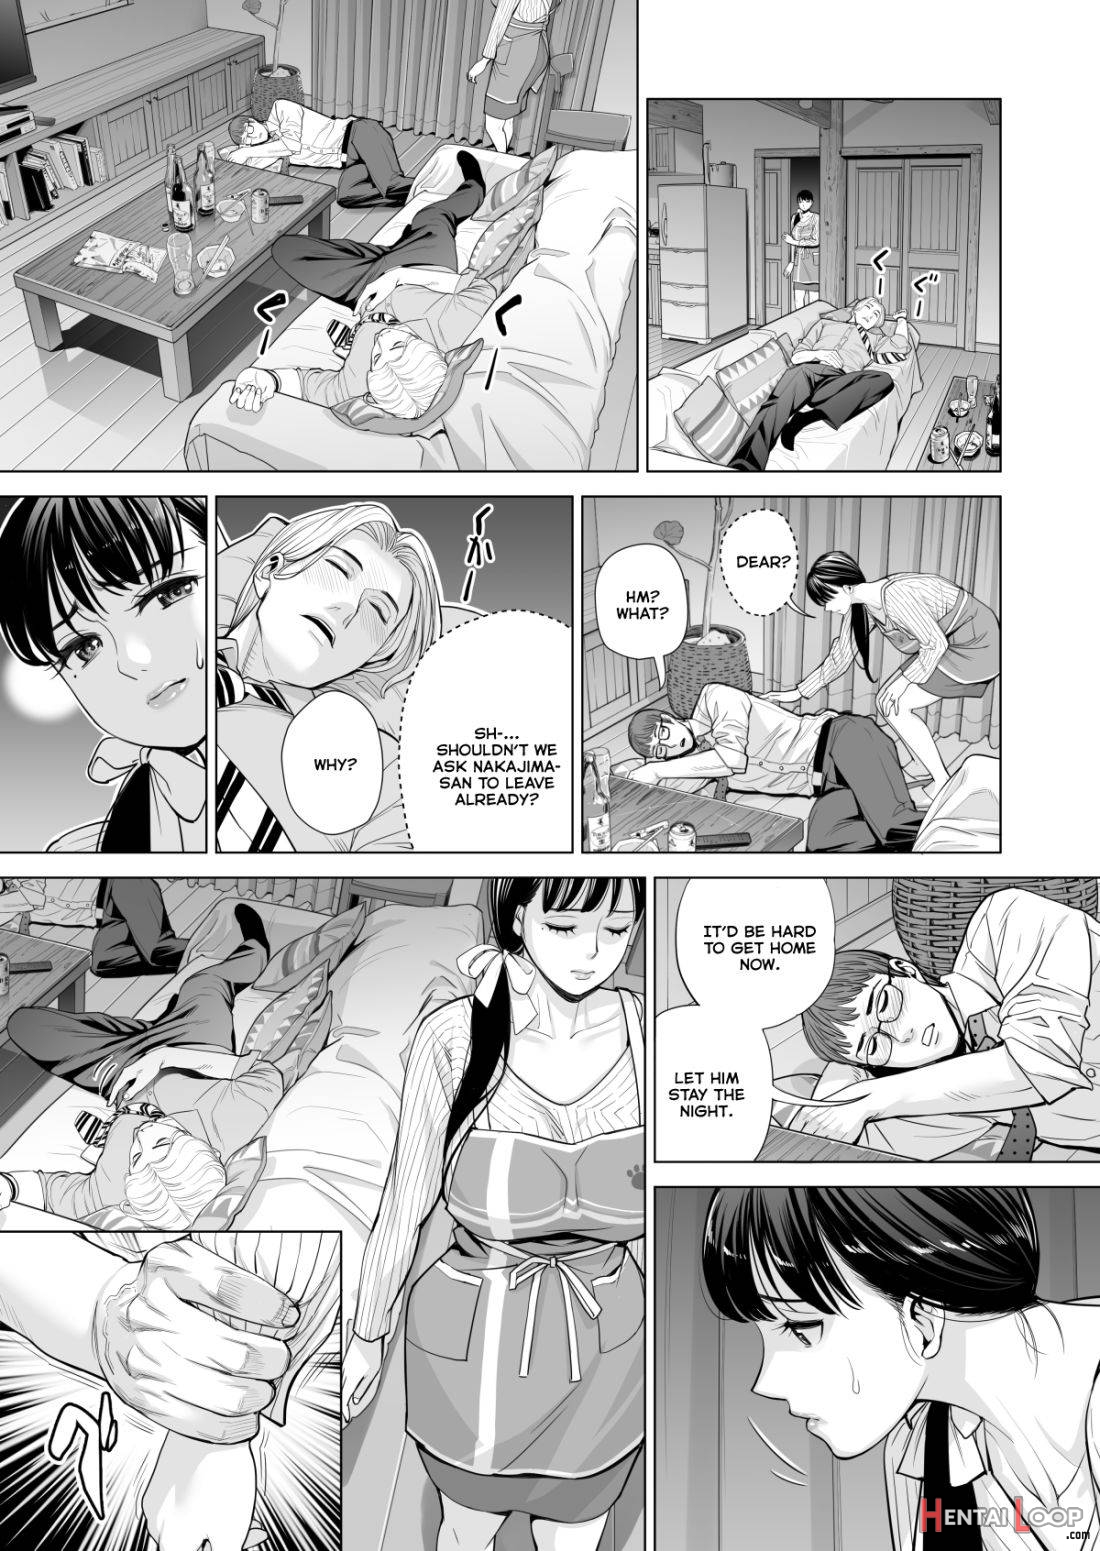 Tsukiyo no Midare Zake (Zenpen) Moonlit Intoxication ~ A Housewife Stolen by a Coworker Besides her Blackout Drunk Husband ~ Chapter 1 page 37